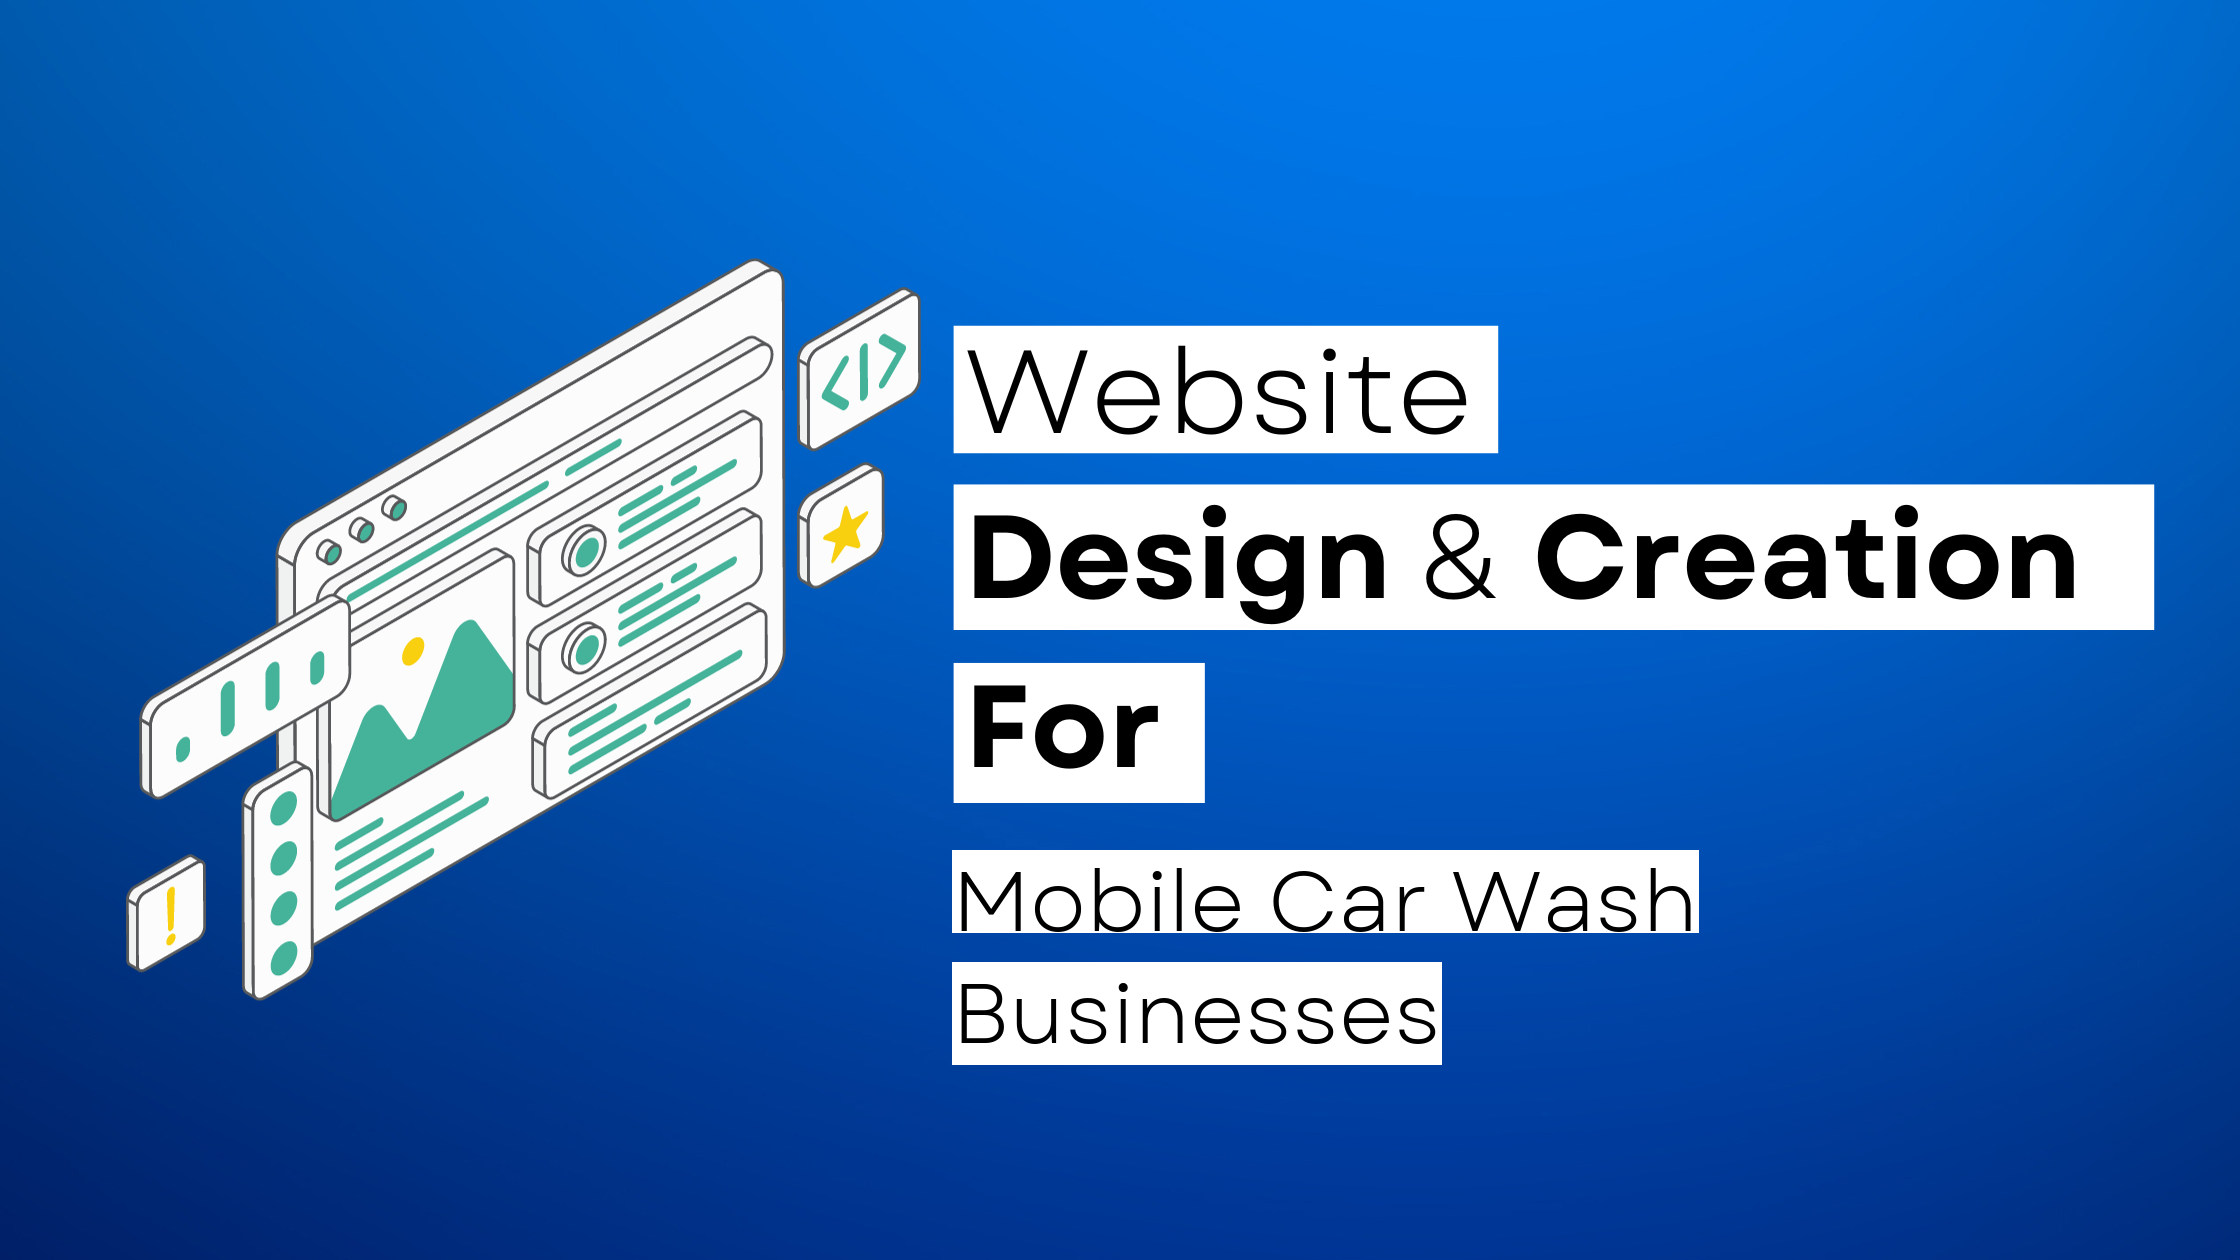 How to start a Mobile Car Wash website